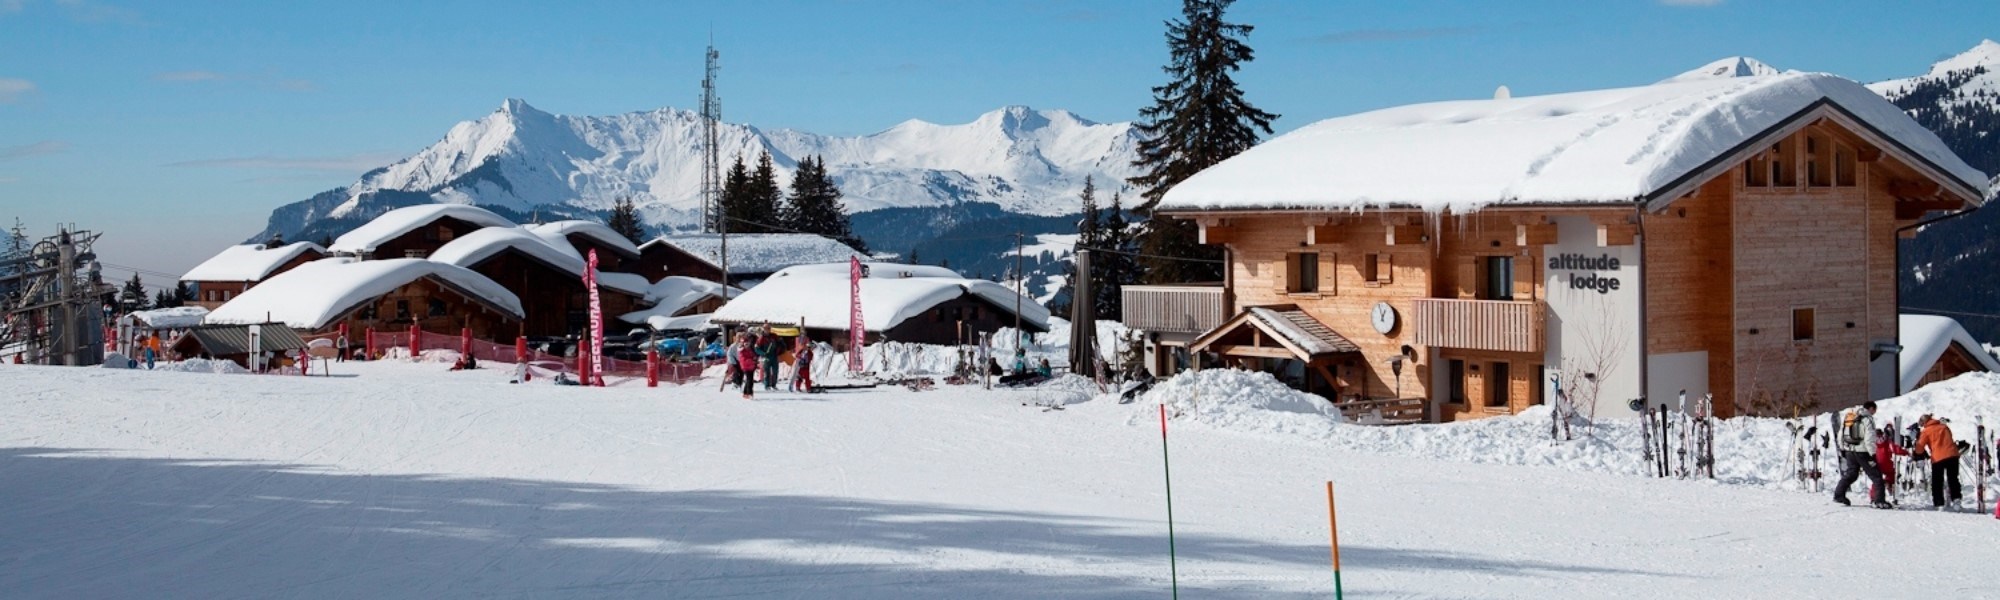 CLUB Altitude Lodge ideal for mixed ability skiers